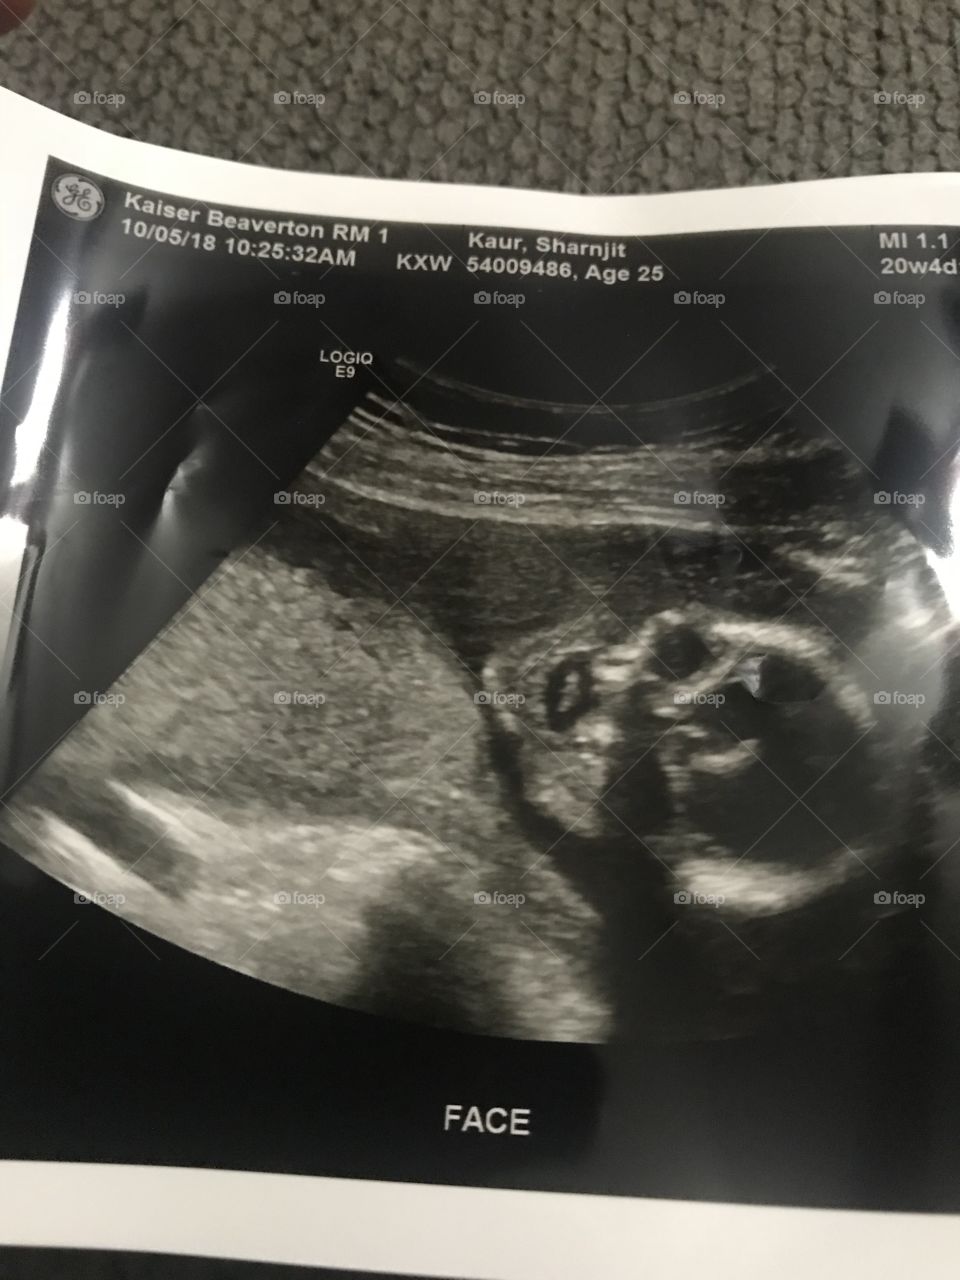 Ultrasound of my first baby girl of 4 month 